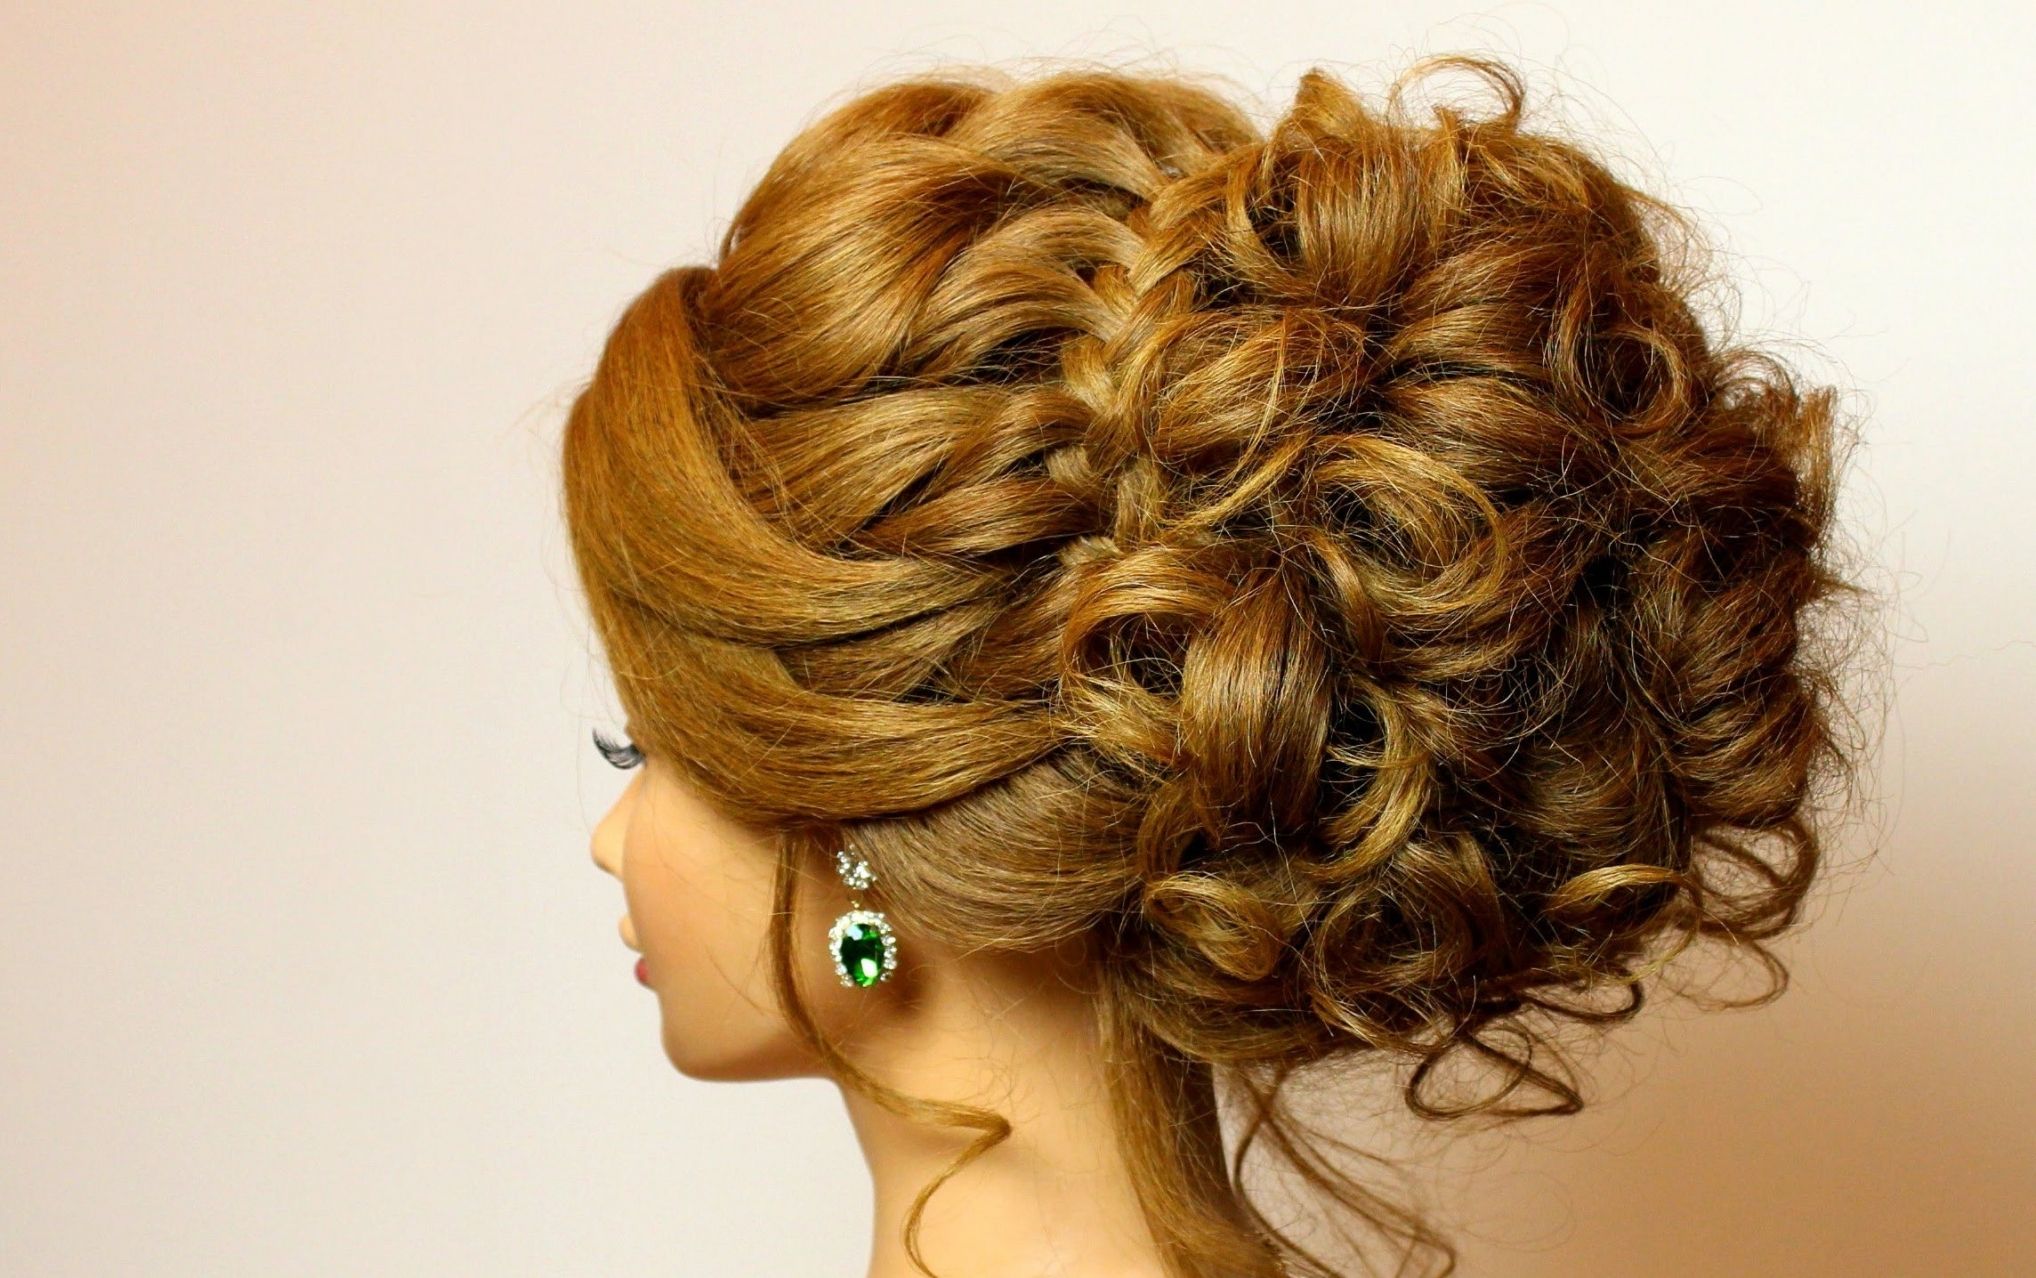 Well Liked Low Bun Wedding Hairstyles With Wedding Hairstyles Ideas: Low Bun Updo Hairstyles For Curly Hair (View 14 of 15)